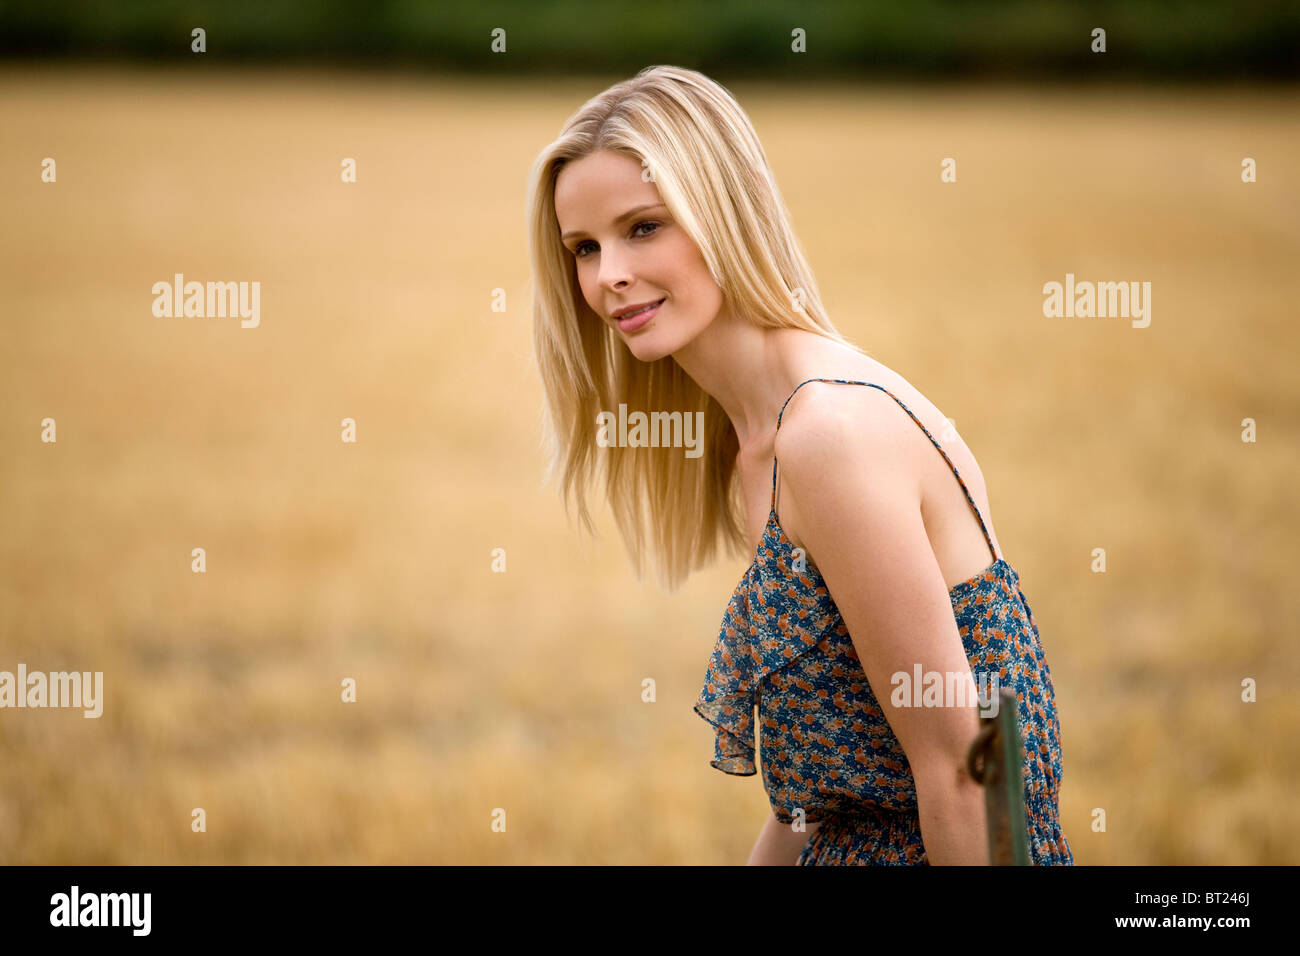 A portrait of a blonde haired woman in a wheatfield Stock Photo